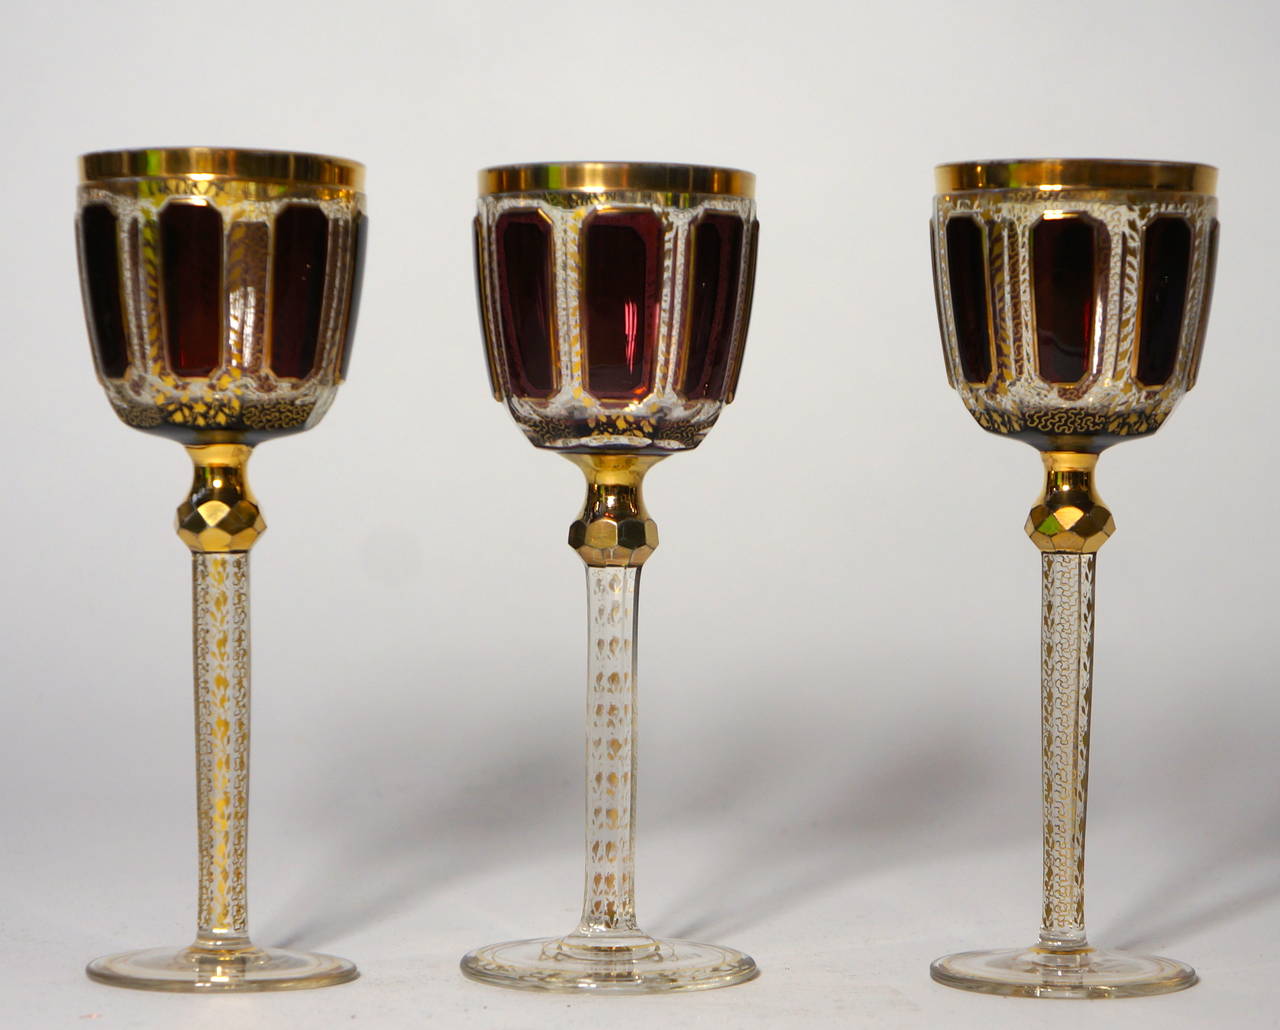 Fine and Rare Collection of Late 19th Century Moser Cut Crystal Glasses 1